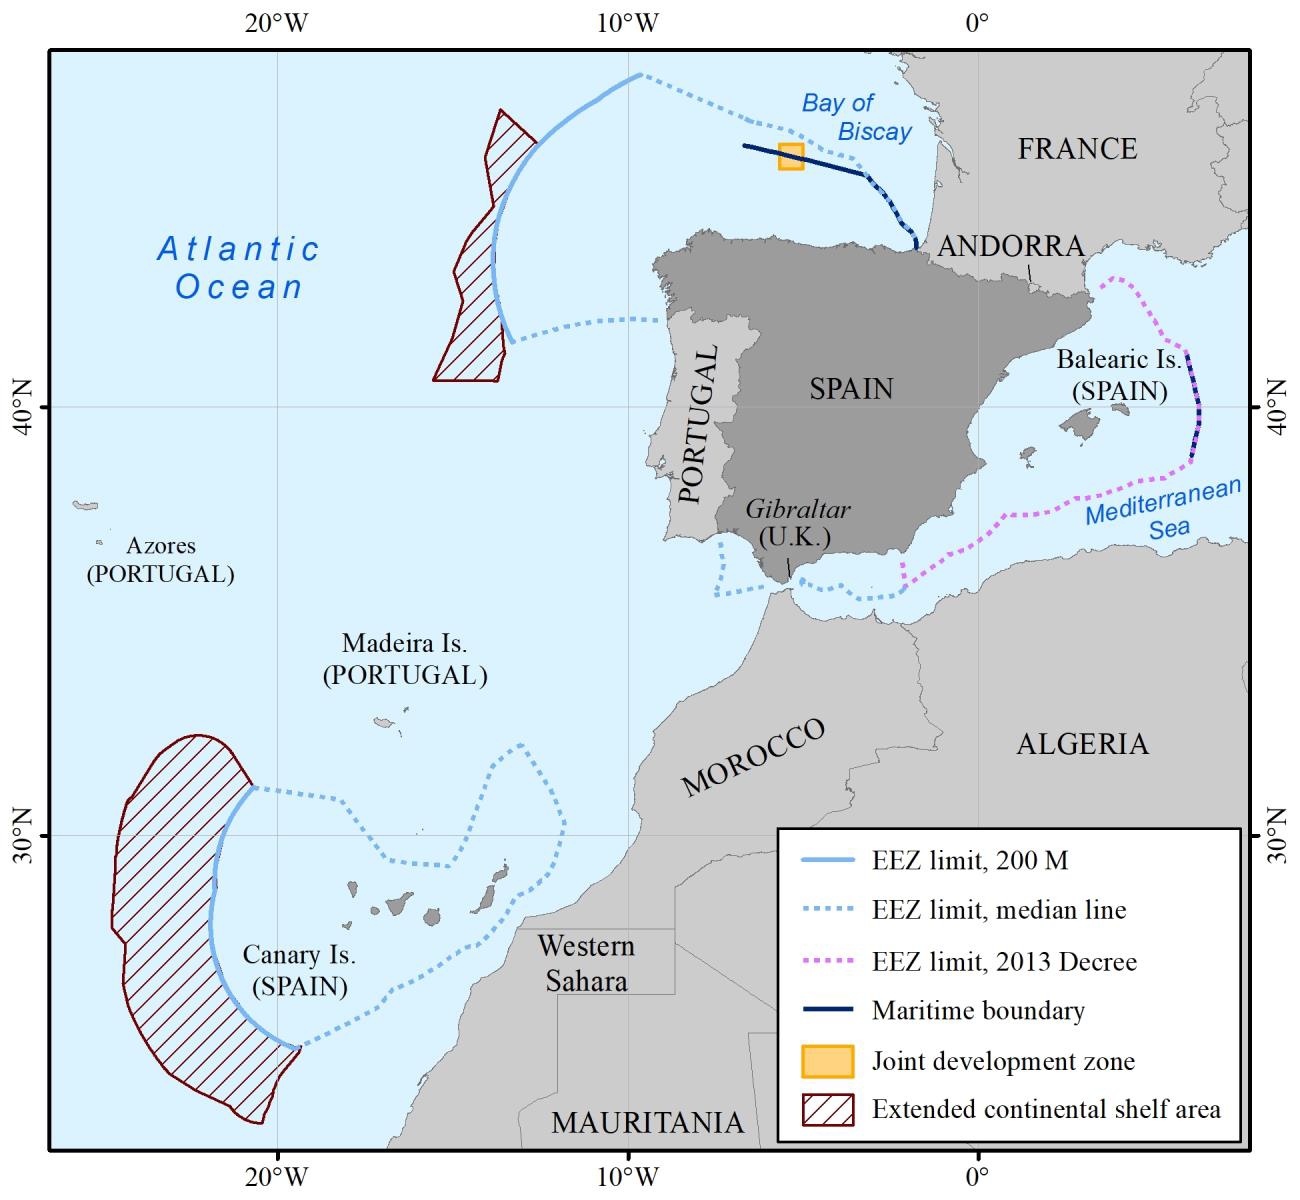 Spain maritime claims, such as limits of the Fisheries Protection Zone in the Mediterranean Sea